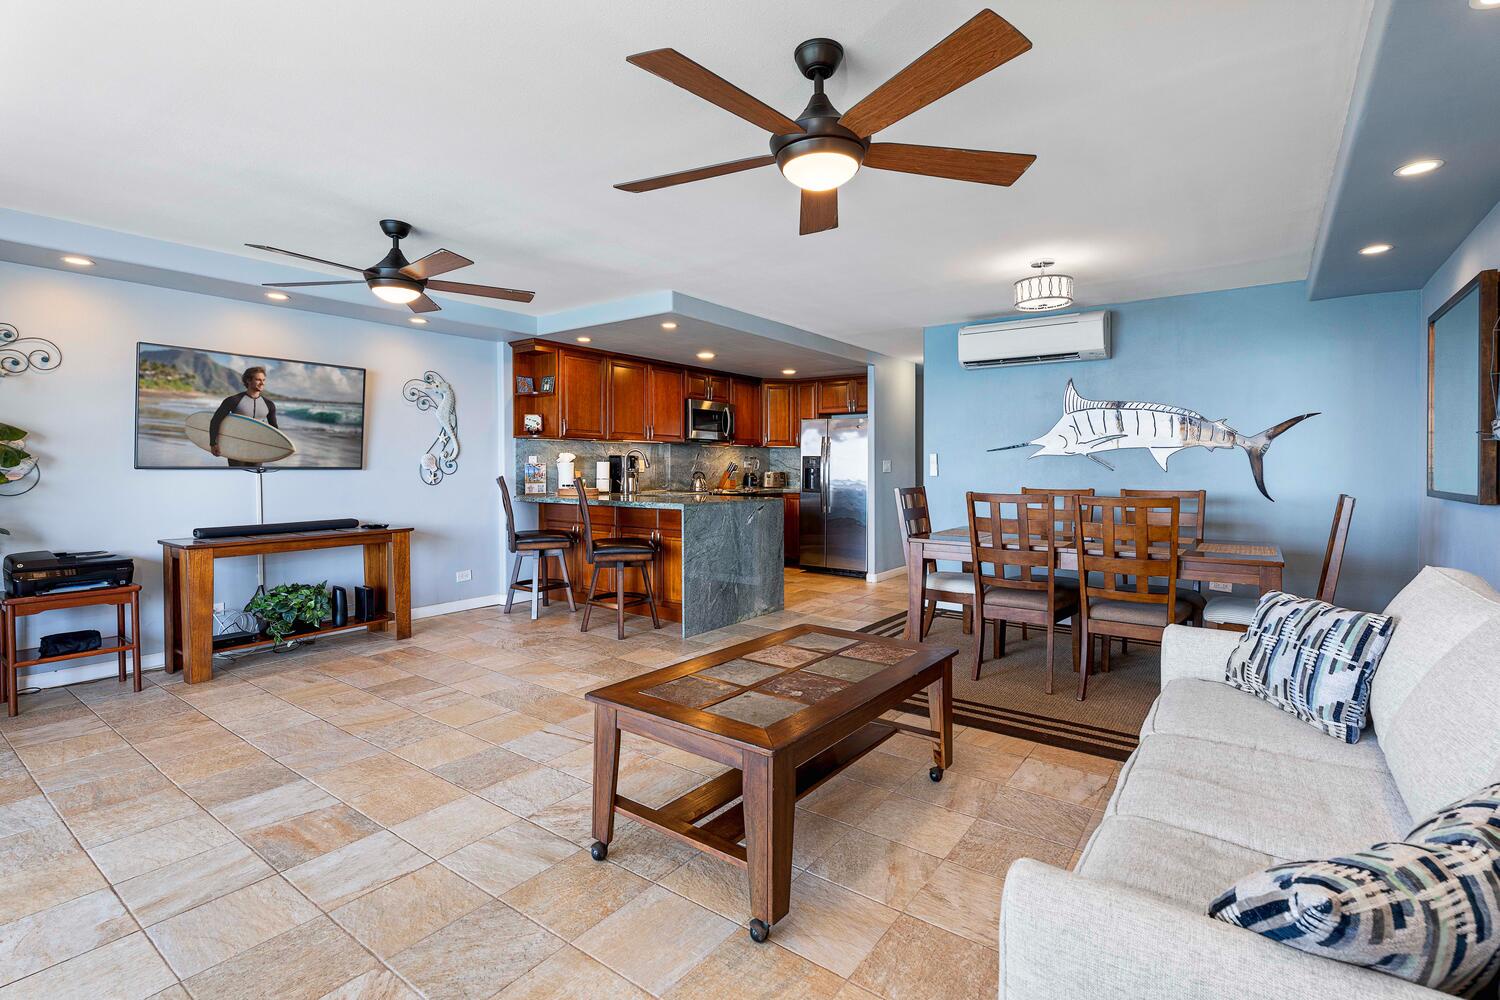 Kailua Kona Vacation Rentals, Kona Alii 403 - Open concept floorplan for seamless flow and connection.